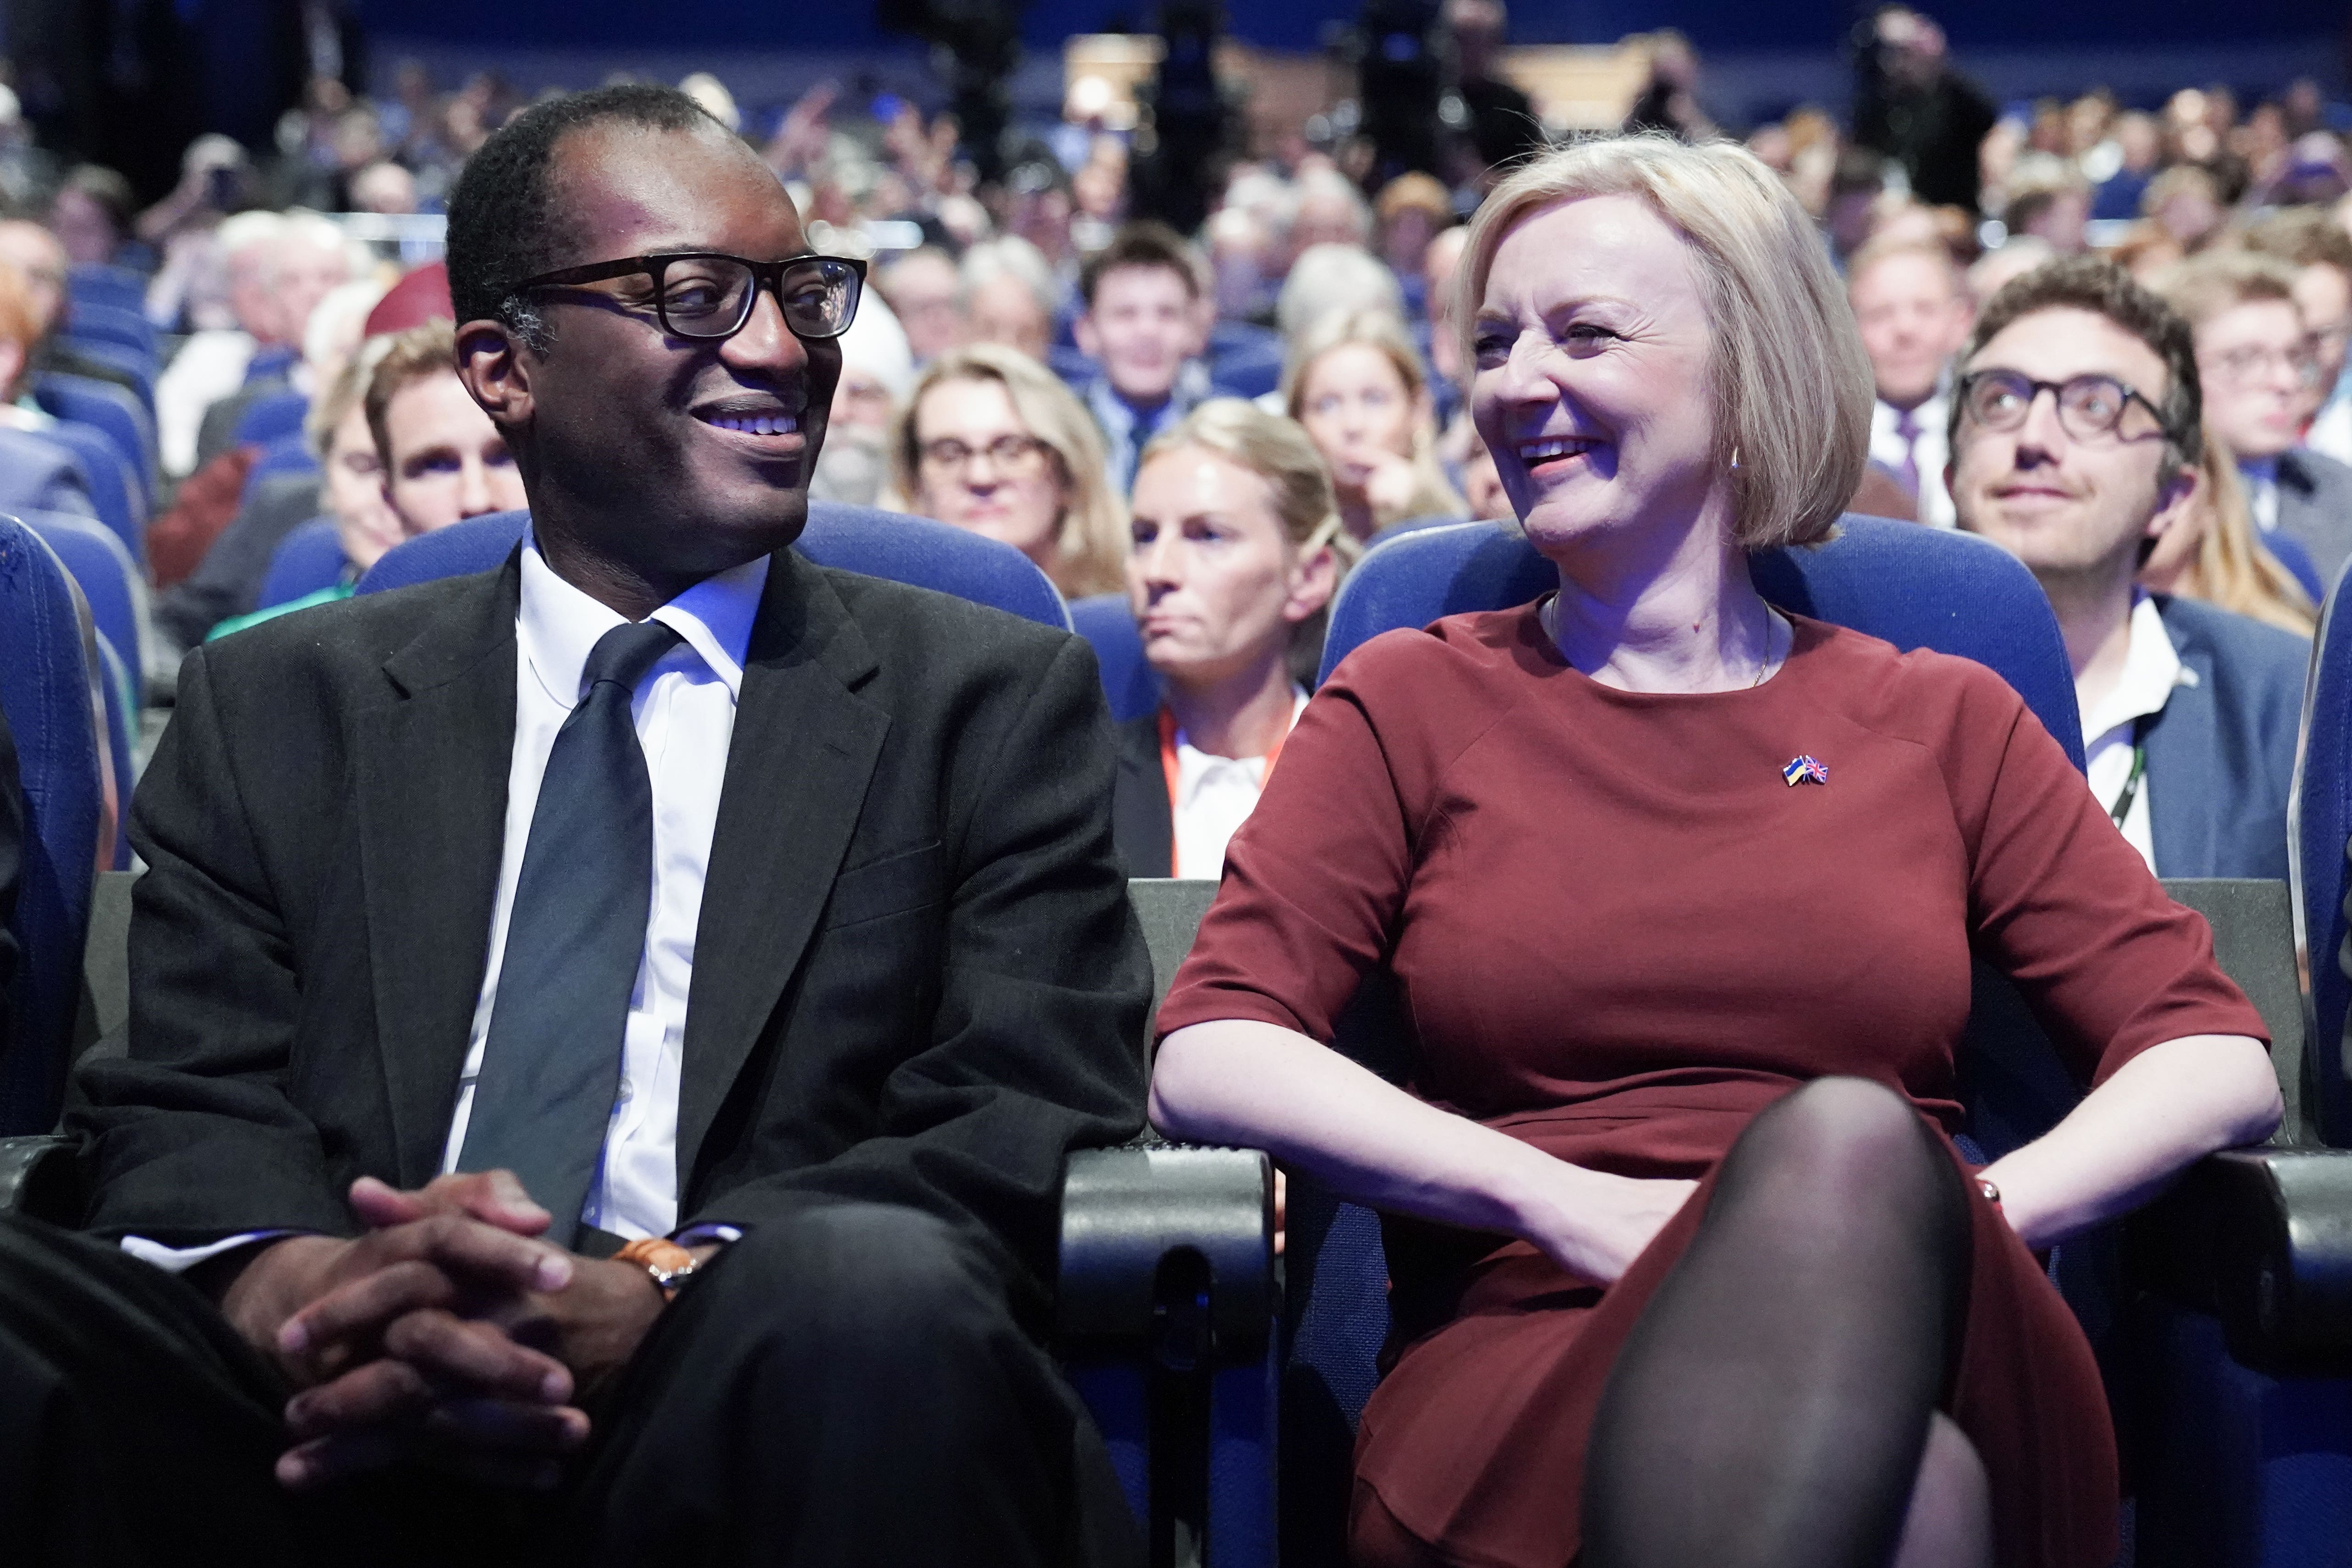 Chancellor Kwasi Kwarteng and Prime Minister Liz Truss have faced much controversy in their first few weeks in the top political roles (Stefan Rousseau/PA)